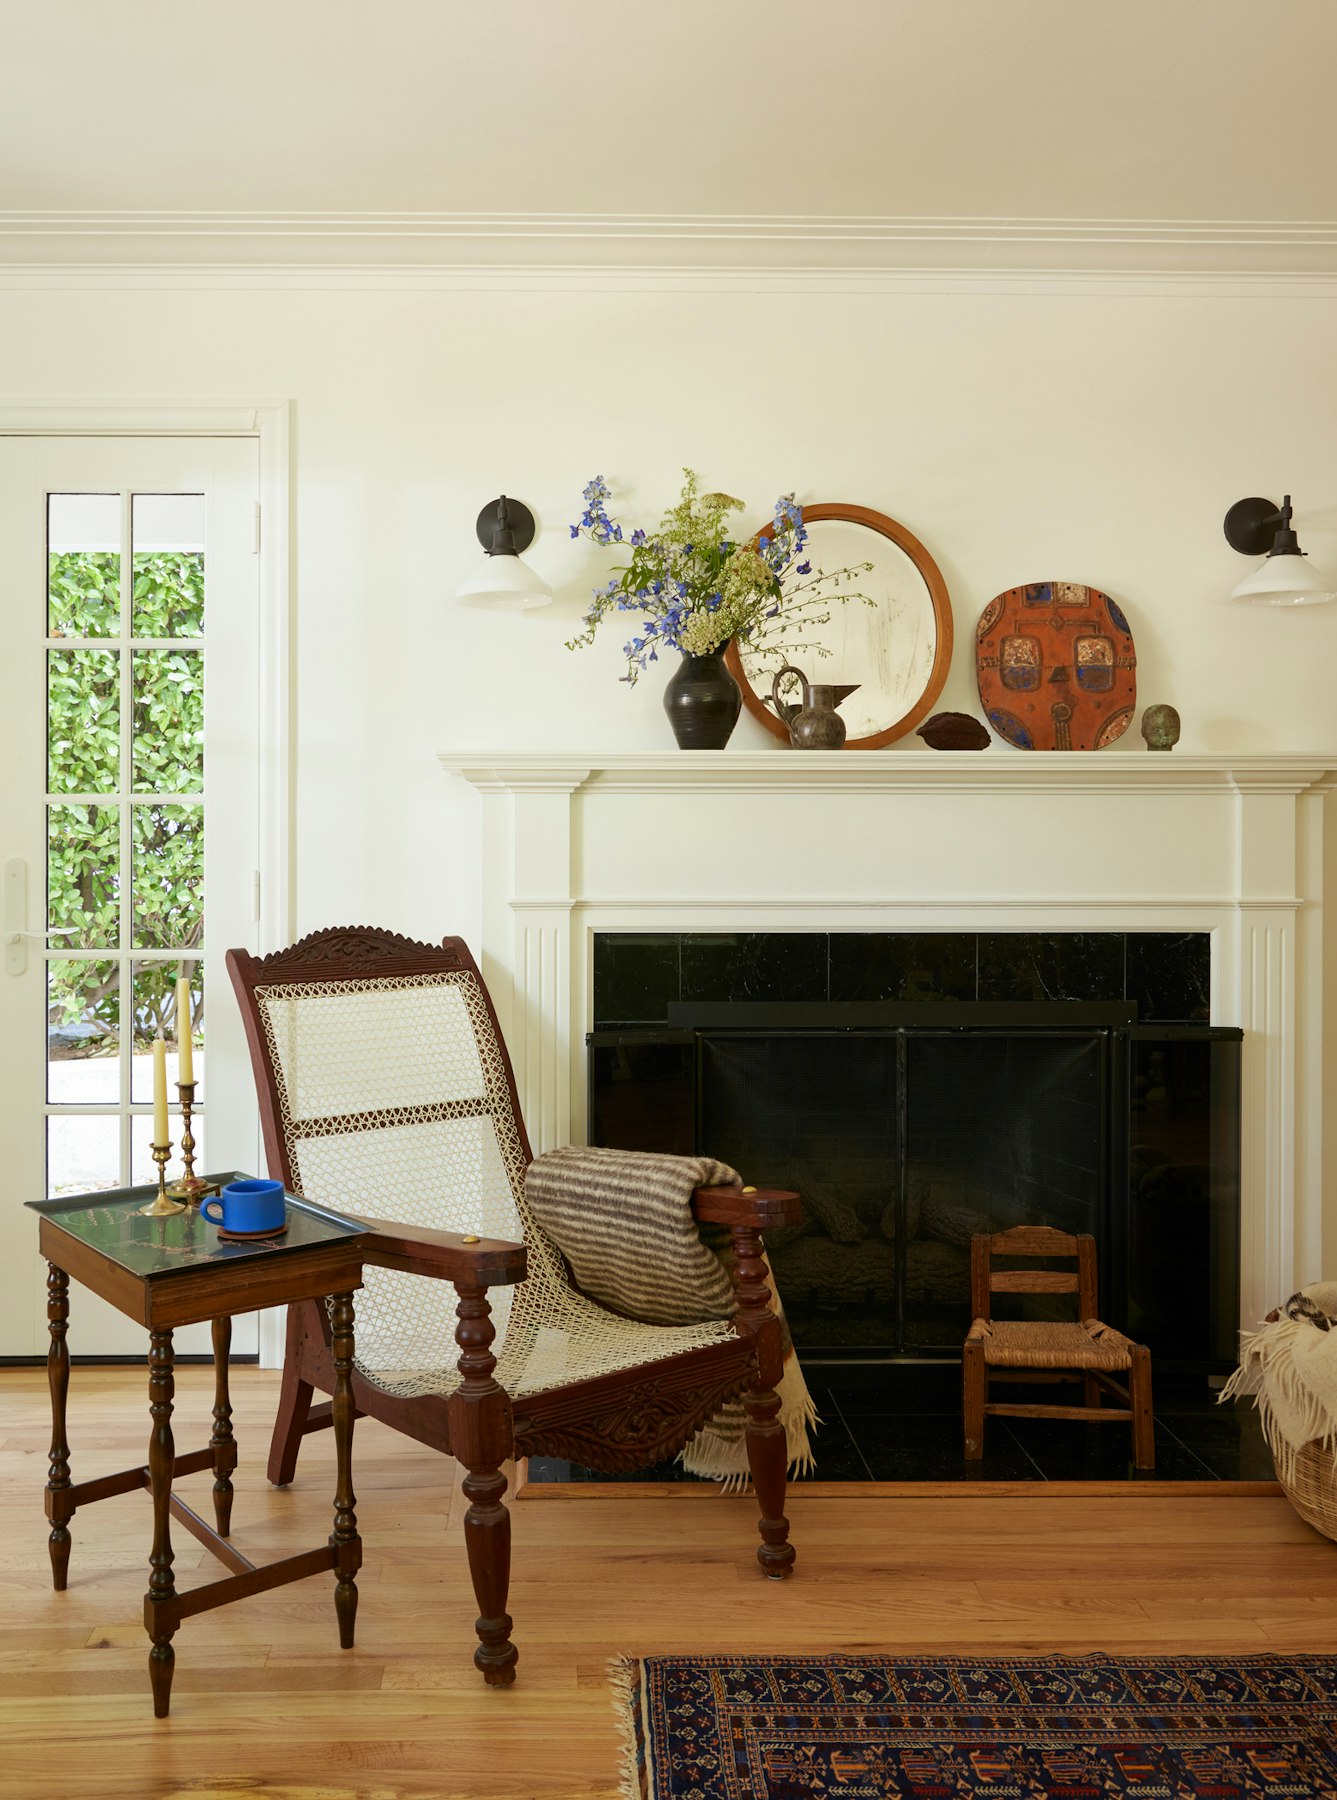 livingroom showing fireplace with african chair and art